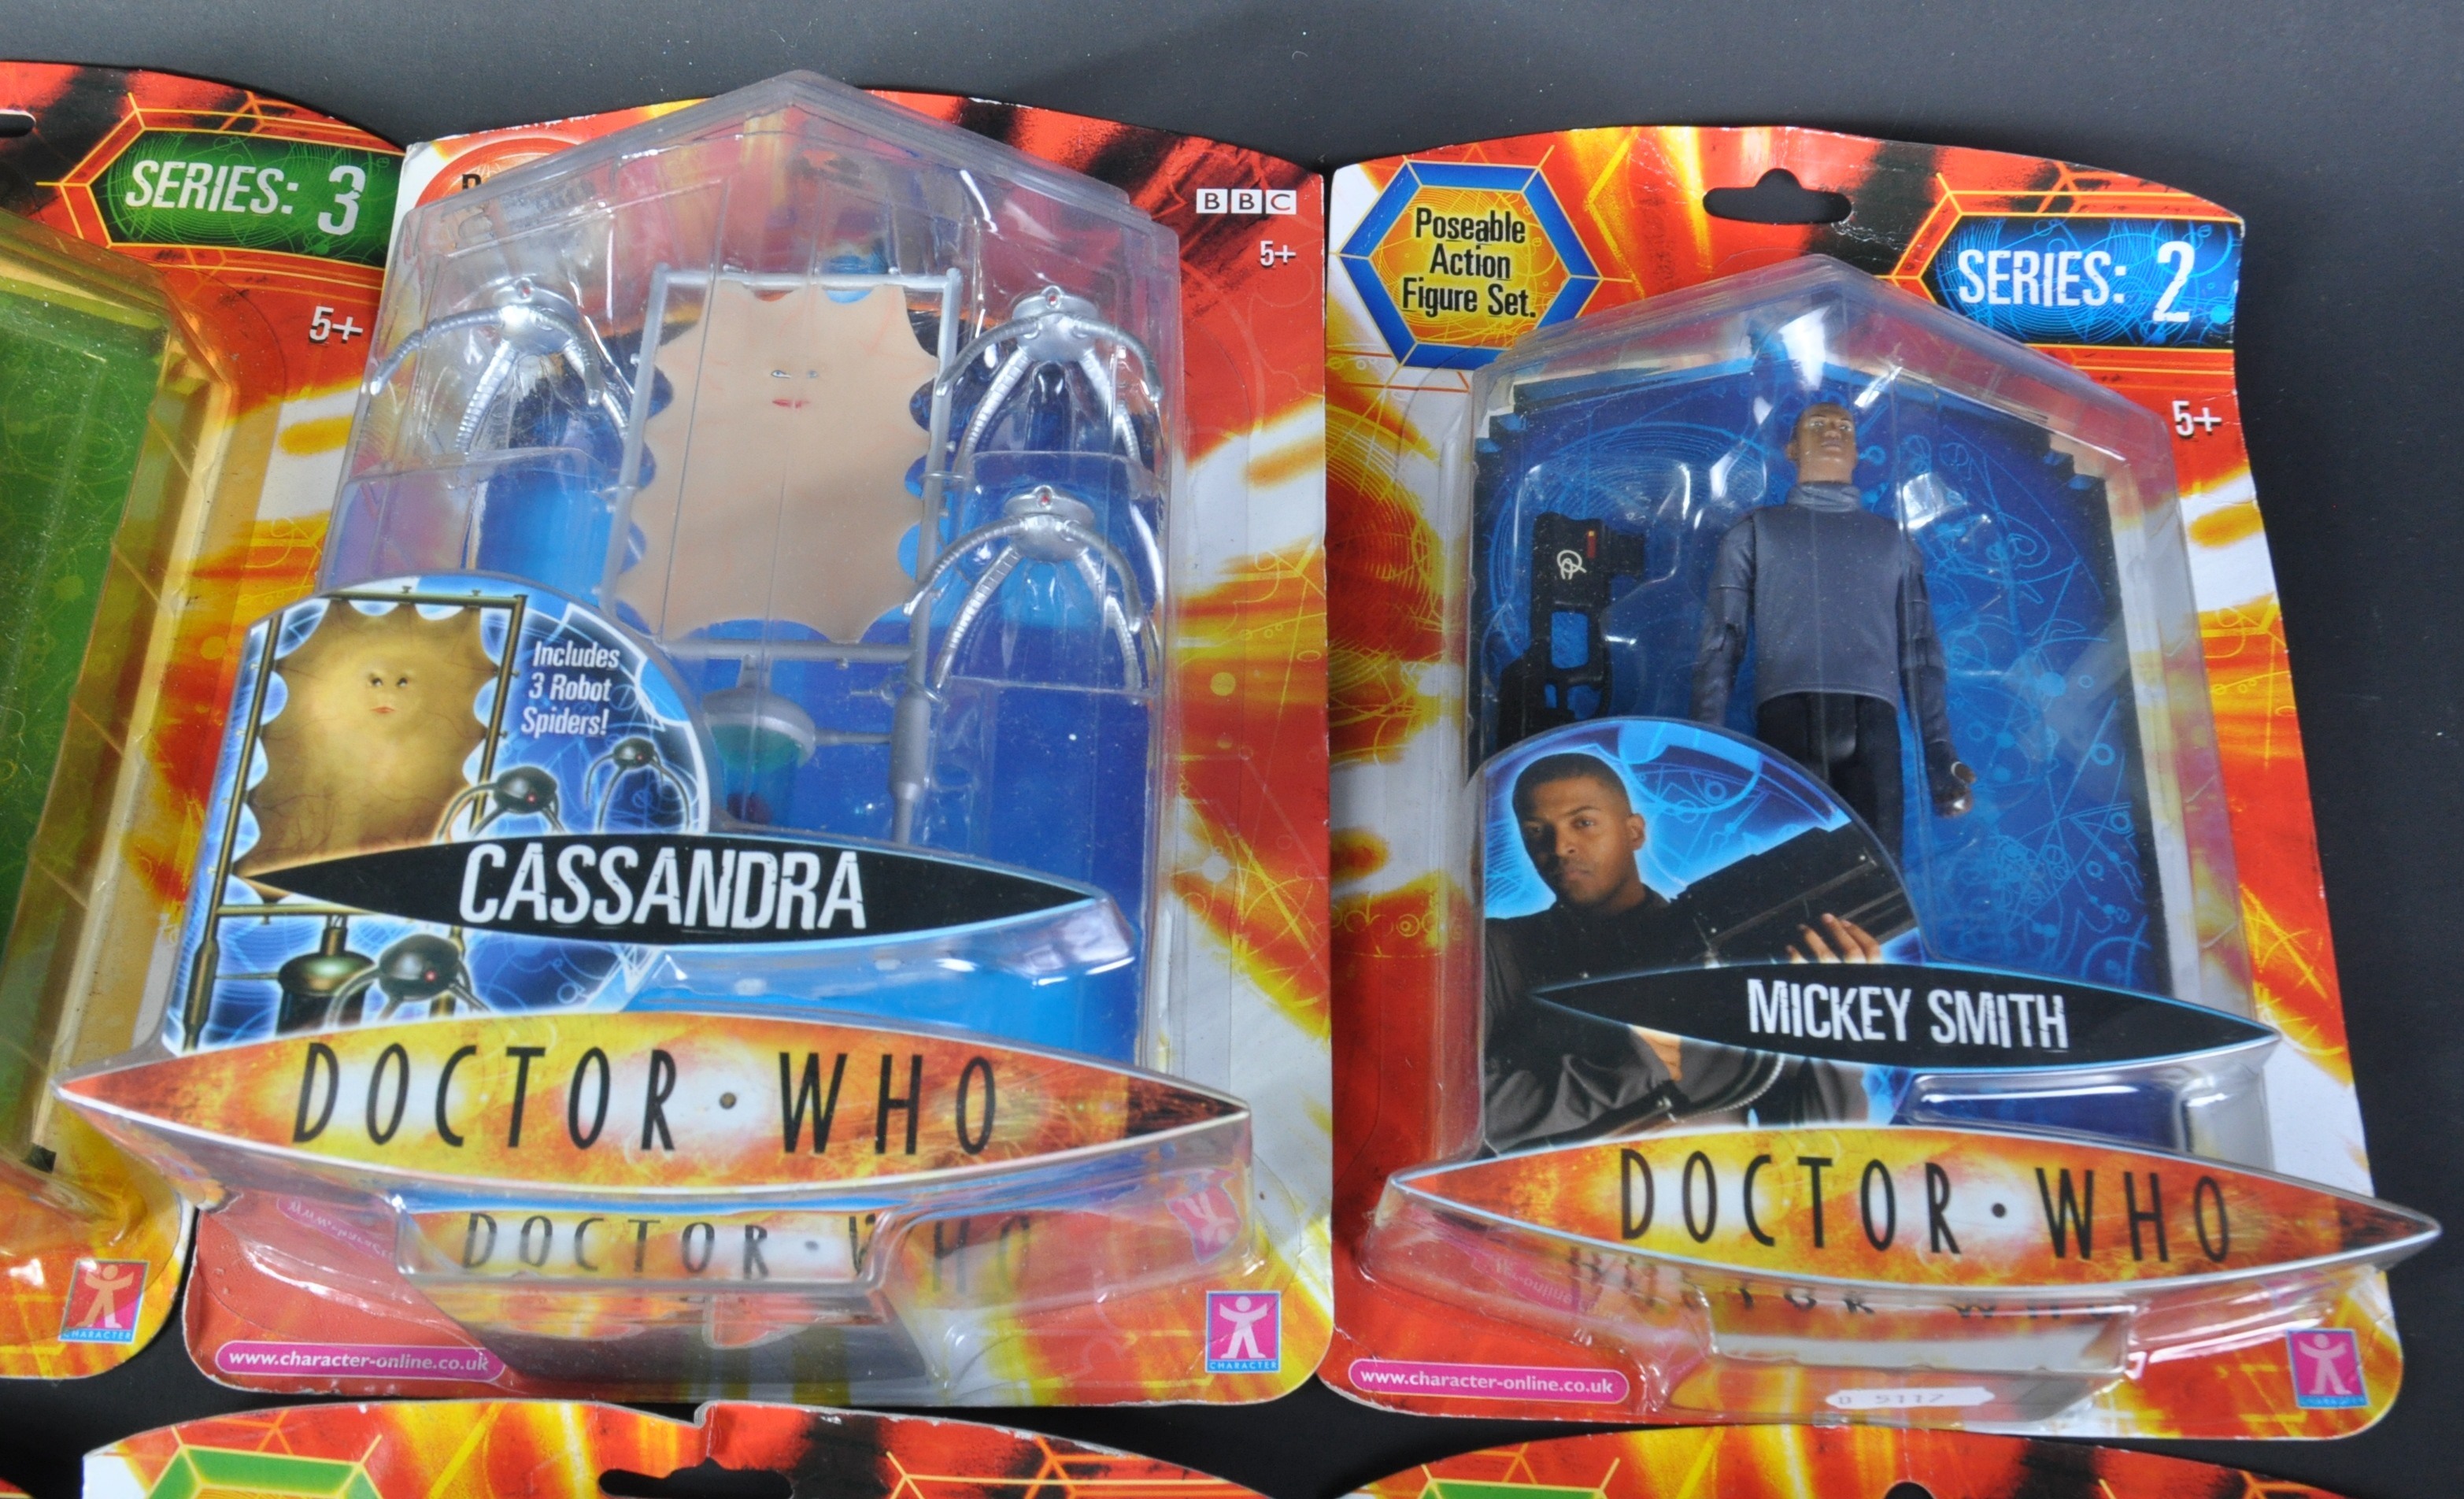 DOCTOR WHO - CHARACTER OPTIONS - COLLECTION OF ACTION FIGURES - Image 4 of 5